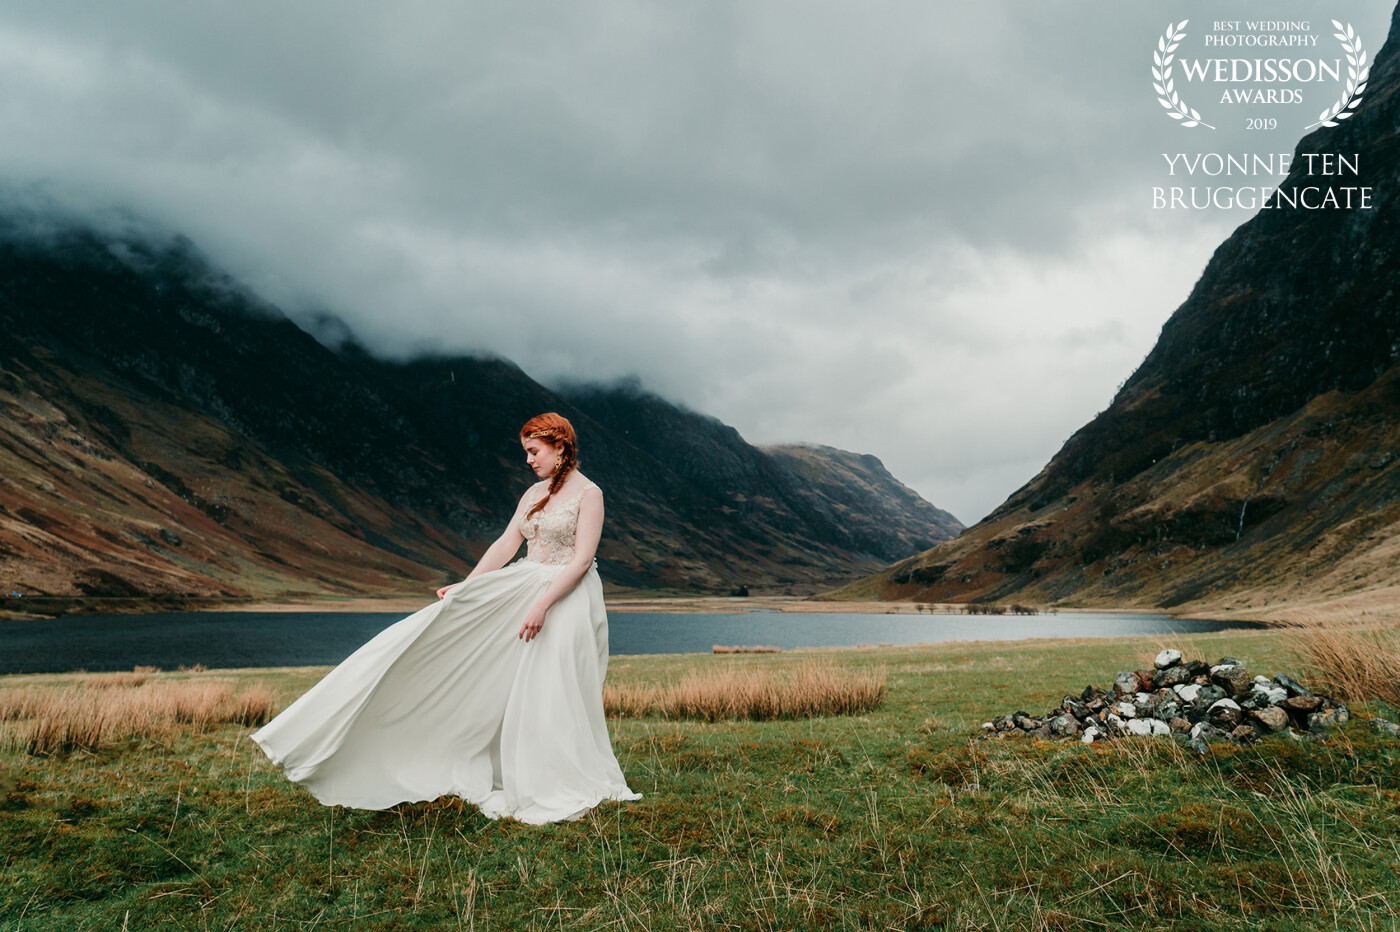 On a cold and windy day in March, we traveled through the Scottish Highlands to shoot wedding photos at ‘the three sisters’<br />
The rain was pouring down every now and then, so we had to hide in the car quite a few times. <br />
But when the sun is finally coming, miracles happen...